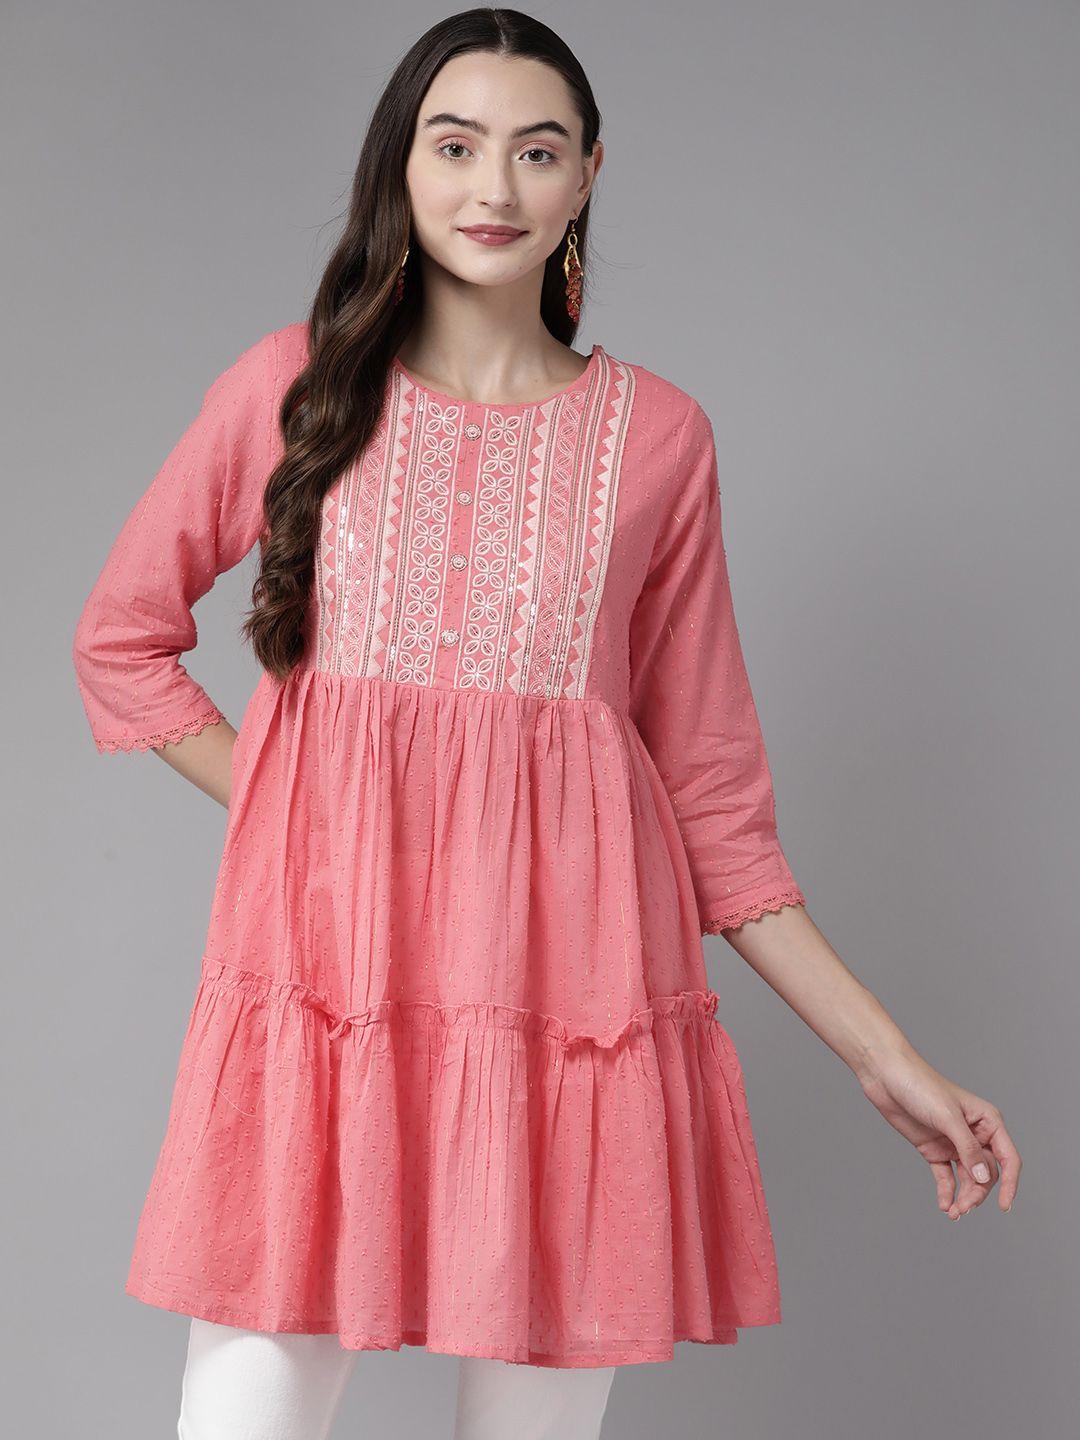 amirah s embroidered embellished cotton ethnic tunic